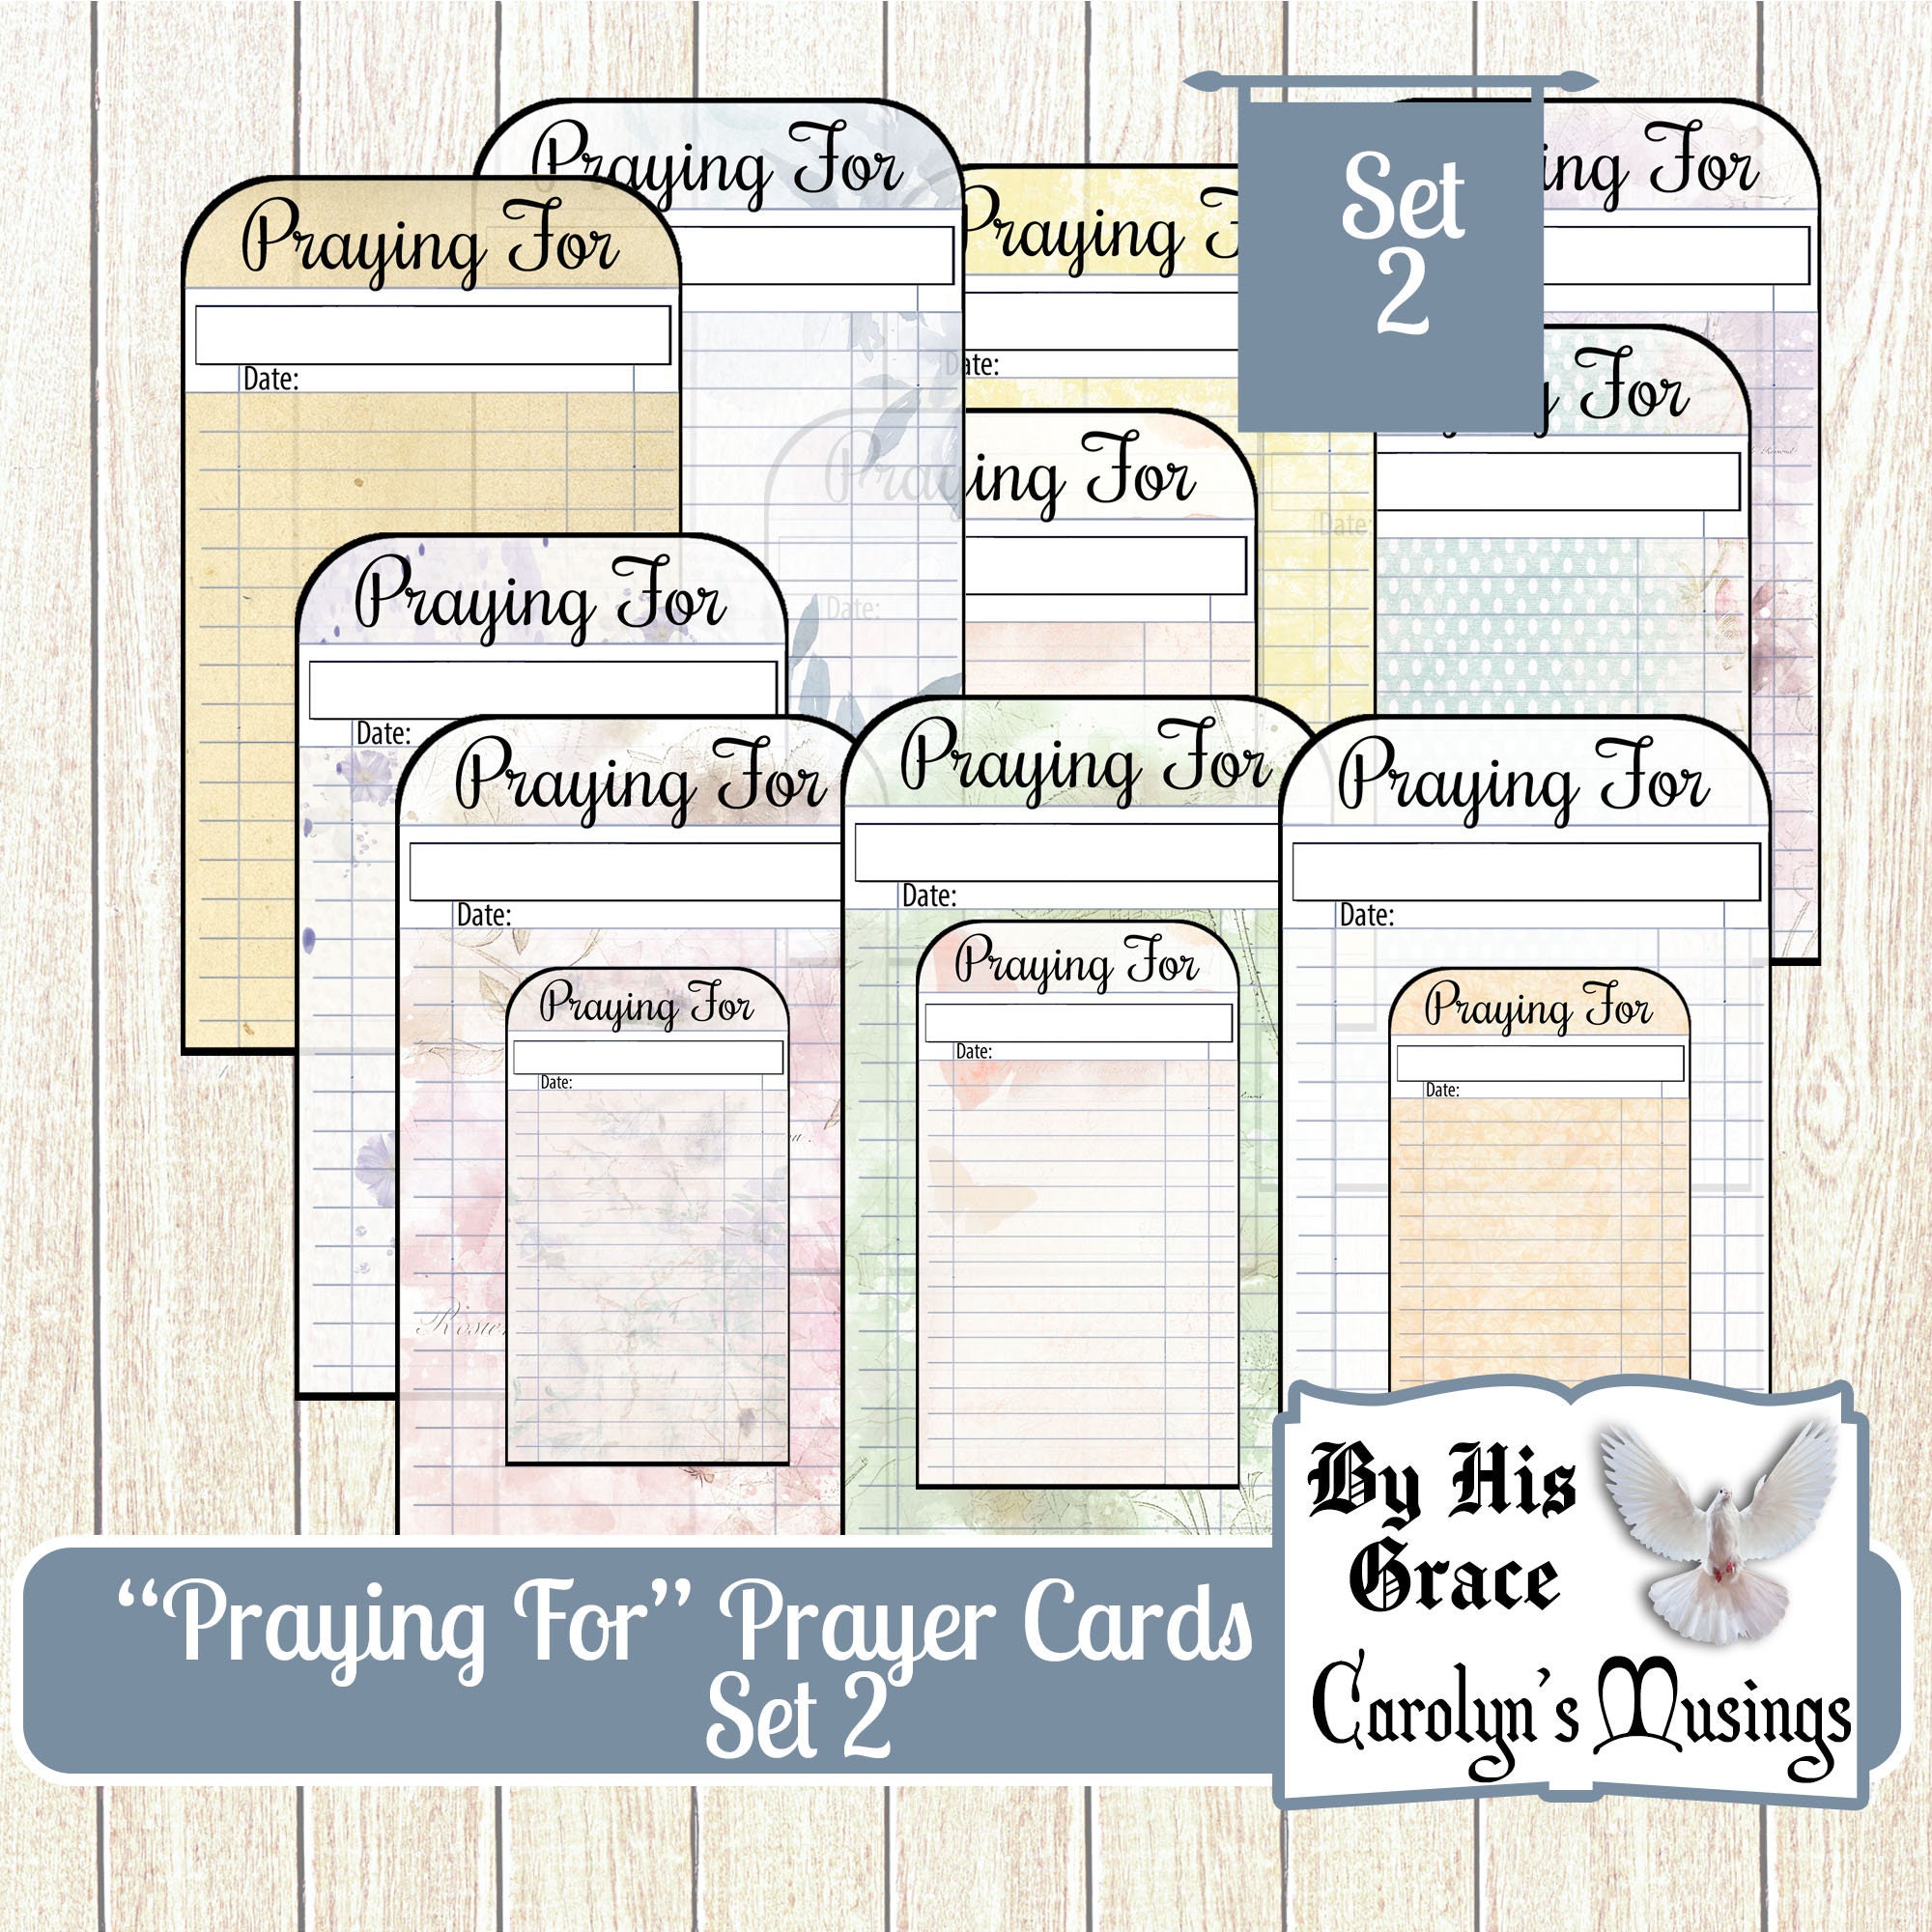 Printable Prayer Journal Stickers March  The Secret Place Collection –  Pink Paper Peppermints